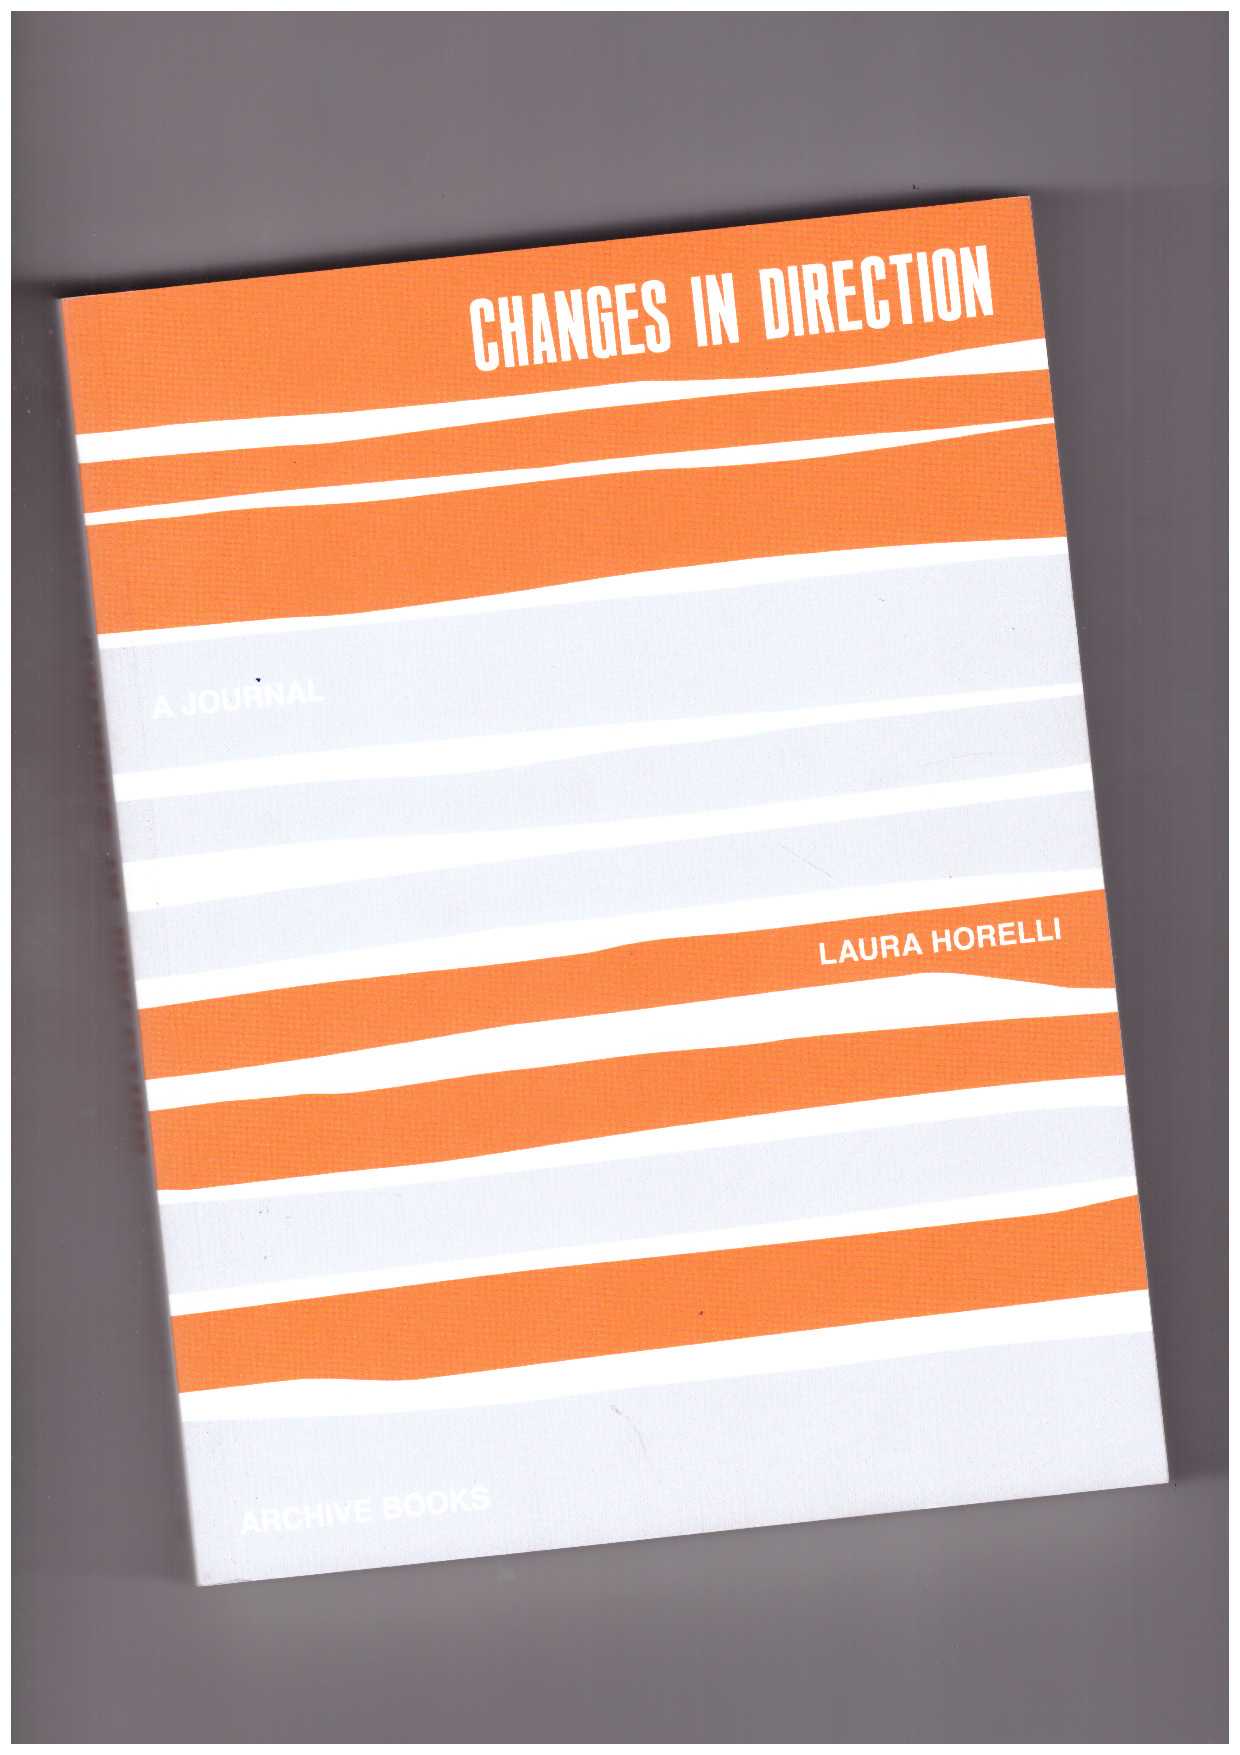 HORELLI, Laura - Changes in direction - a journal